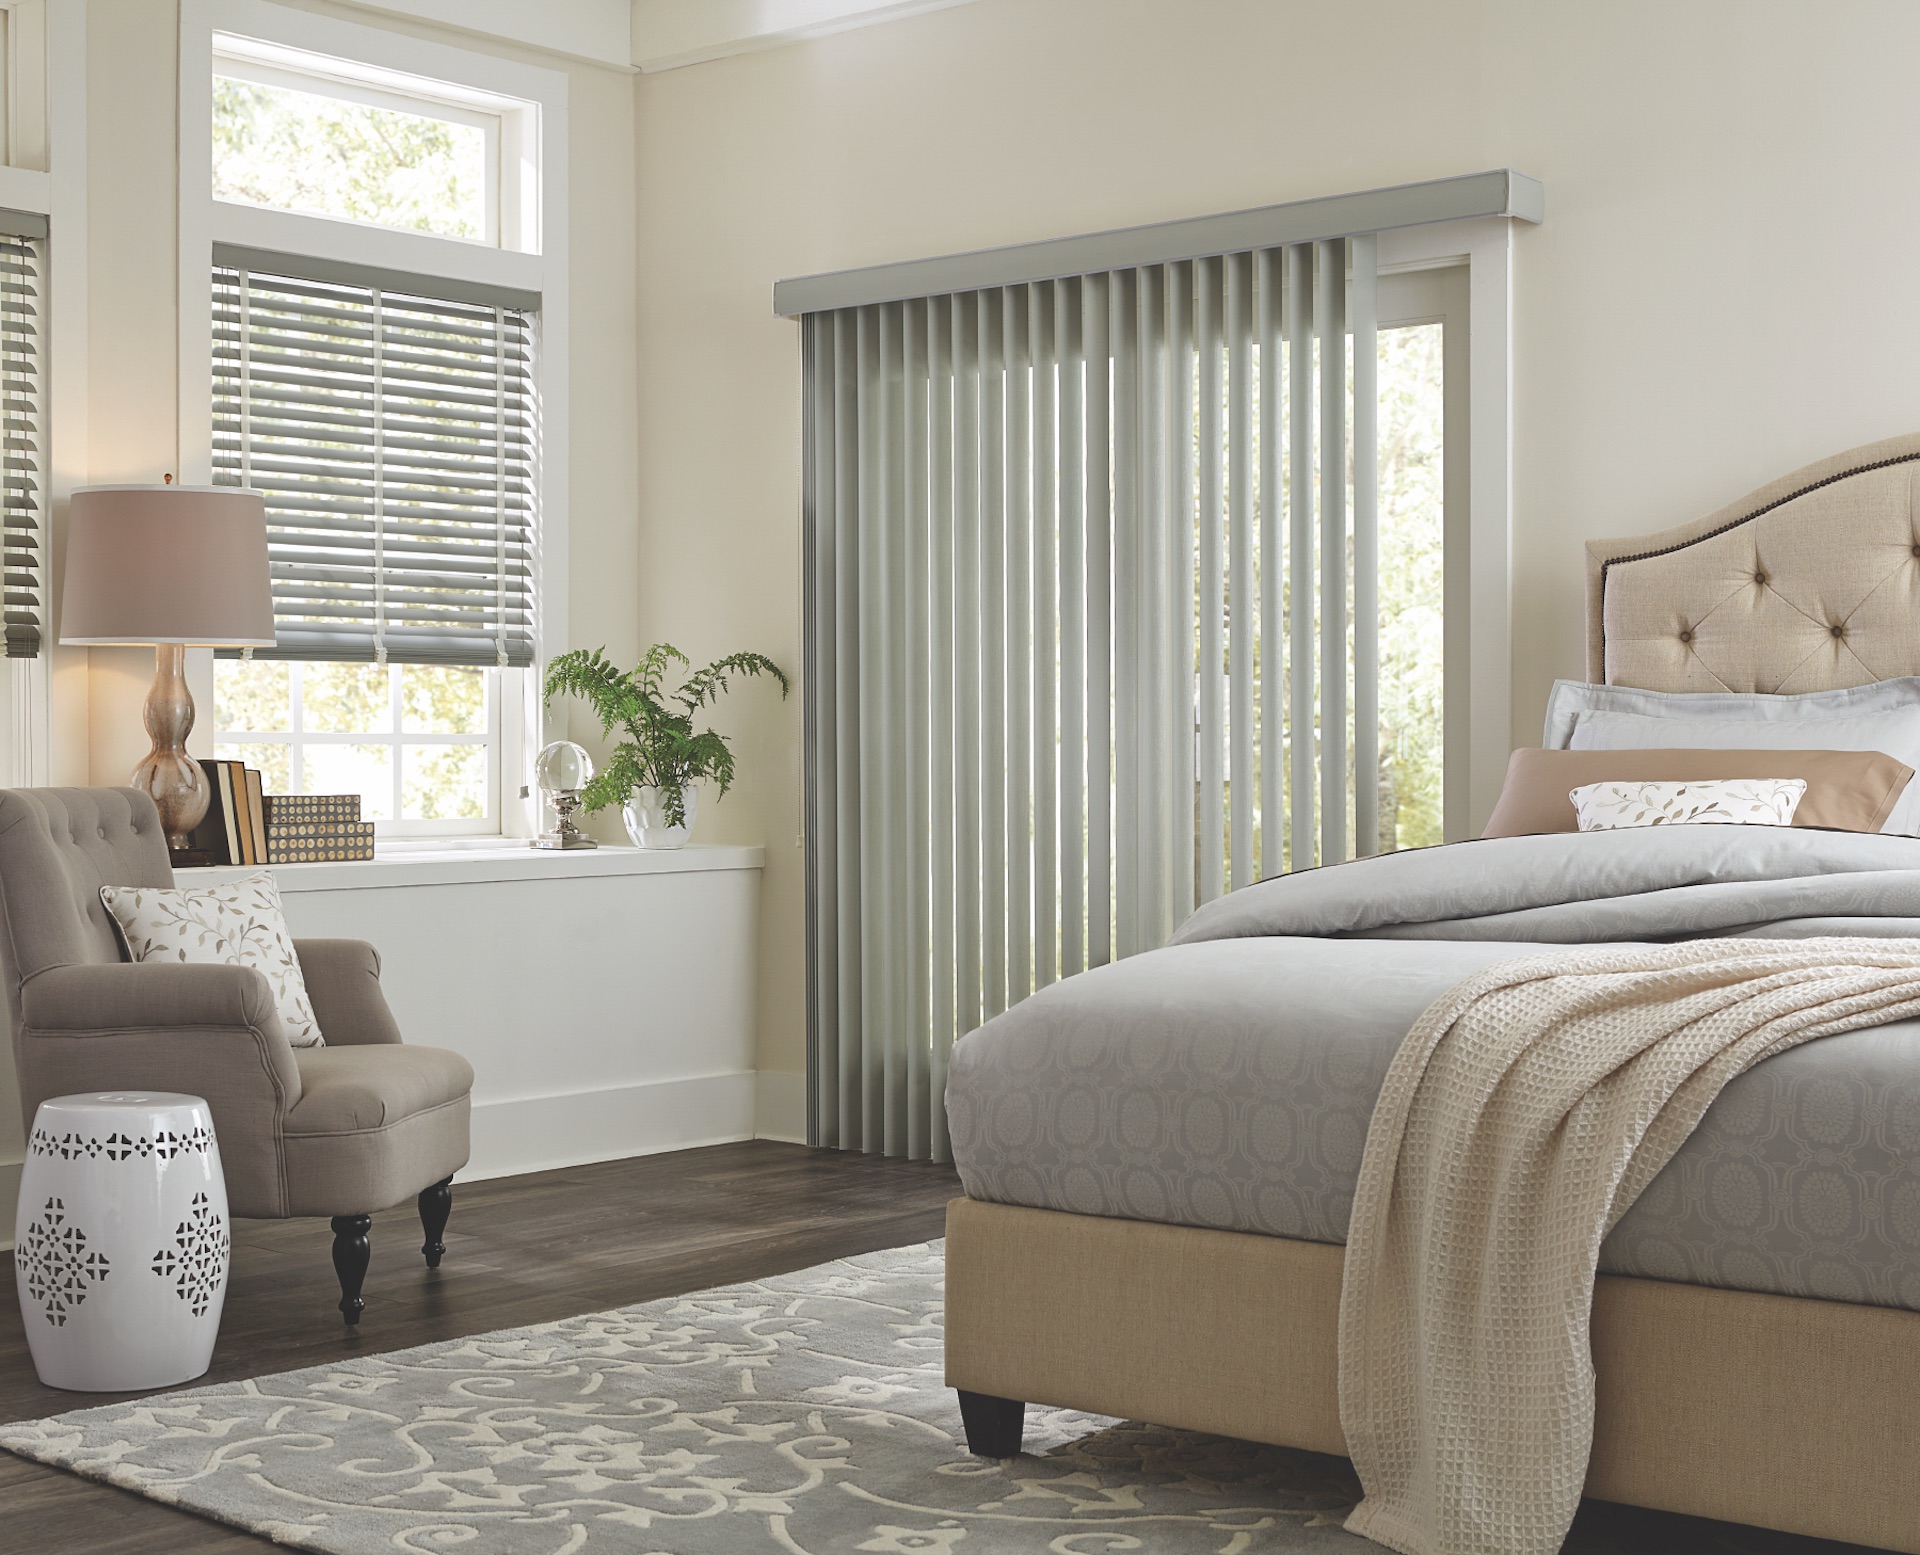 Window Shades - Roman Shades, Roller Shades, Solar Shades, Cellular Shades, & more - Dynamic Delivery Blinds | Nashville, TN